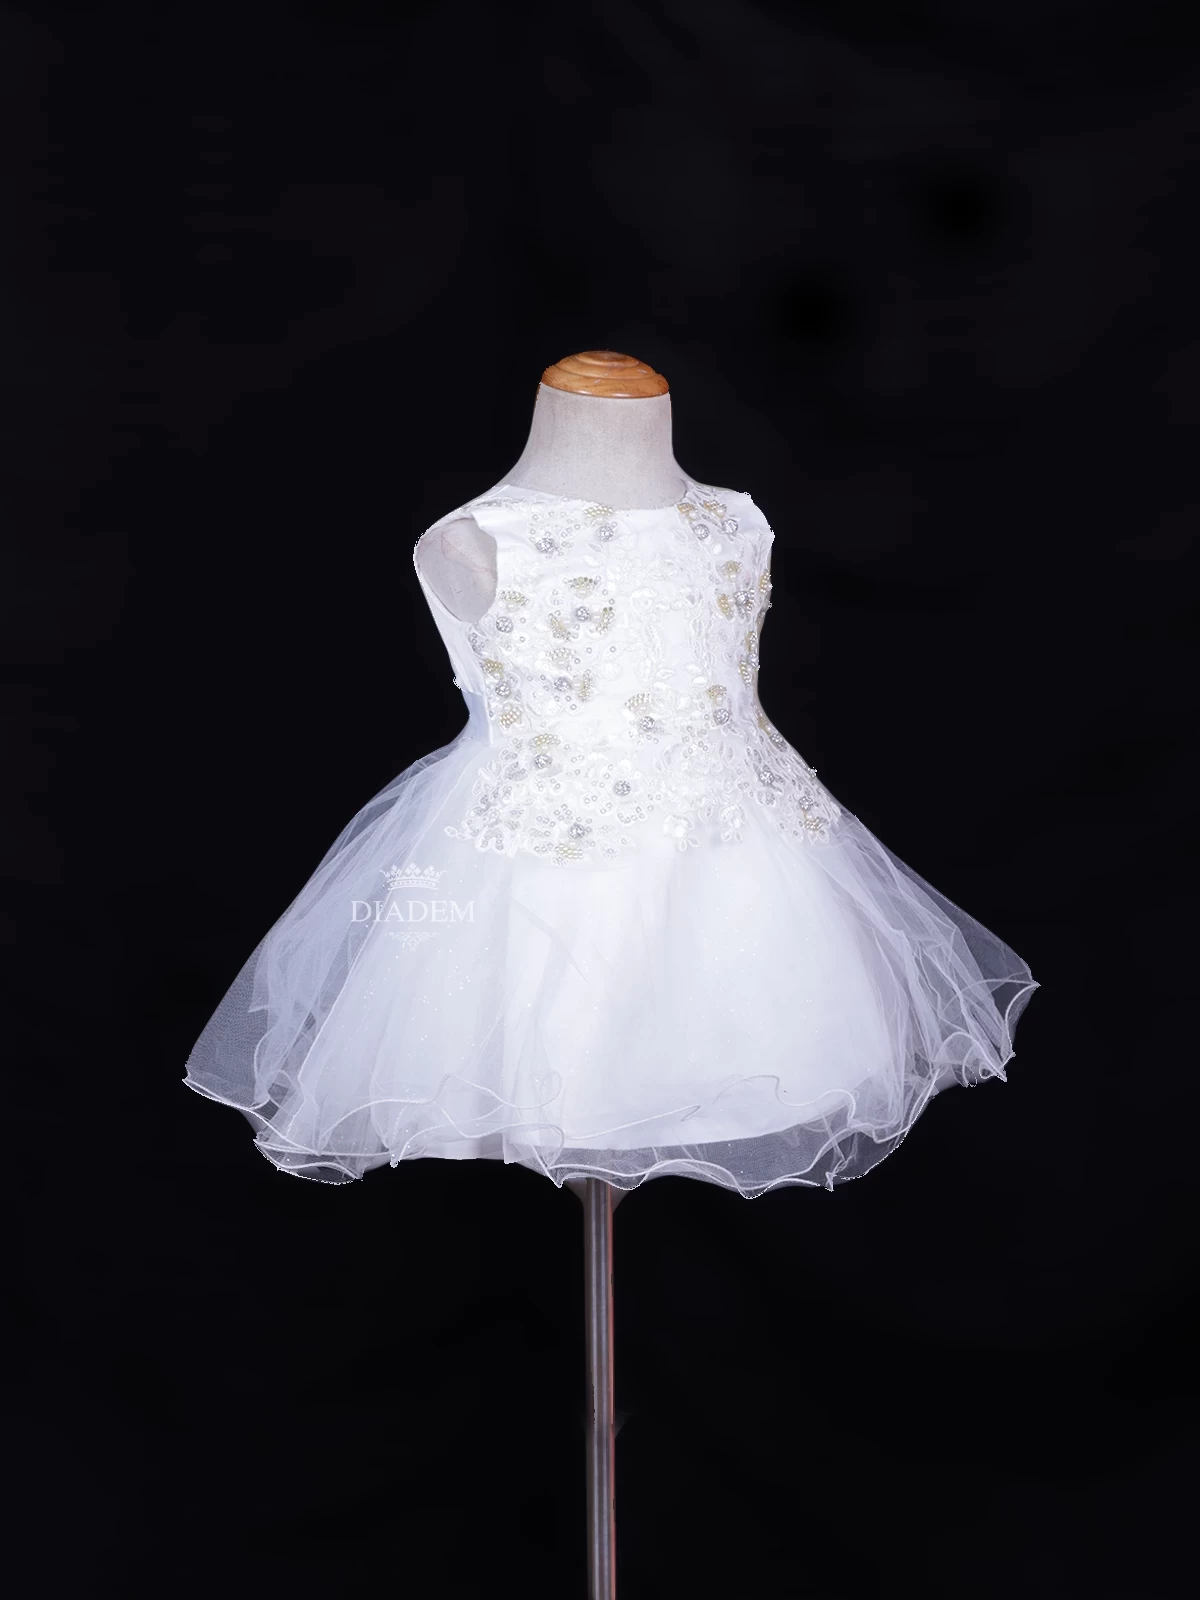 White Net Frock Adorned With Floral Laces And Pearl Beads